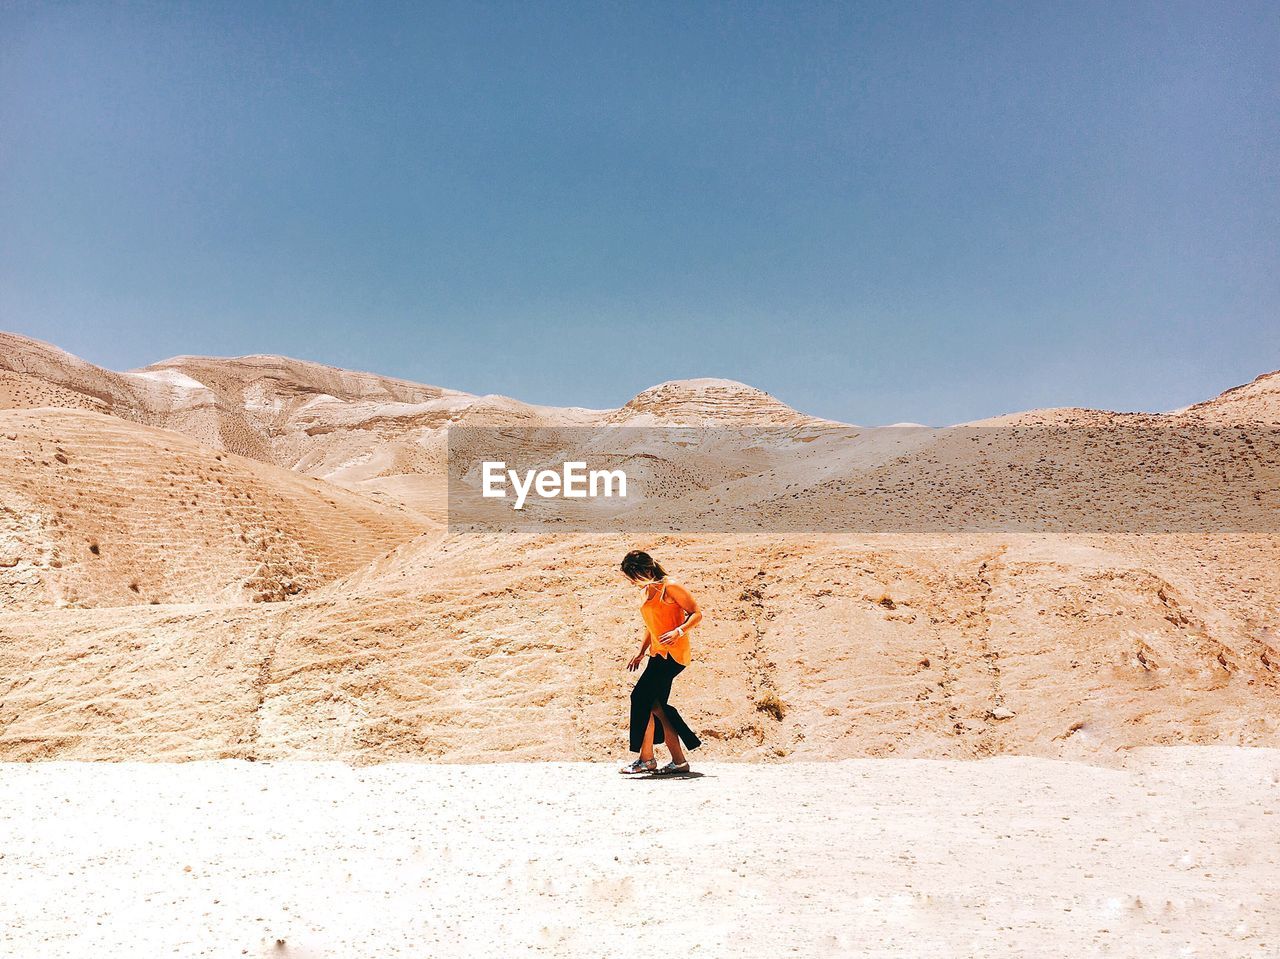 Woman walking against mountains at desert during sunny day